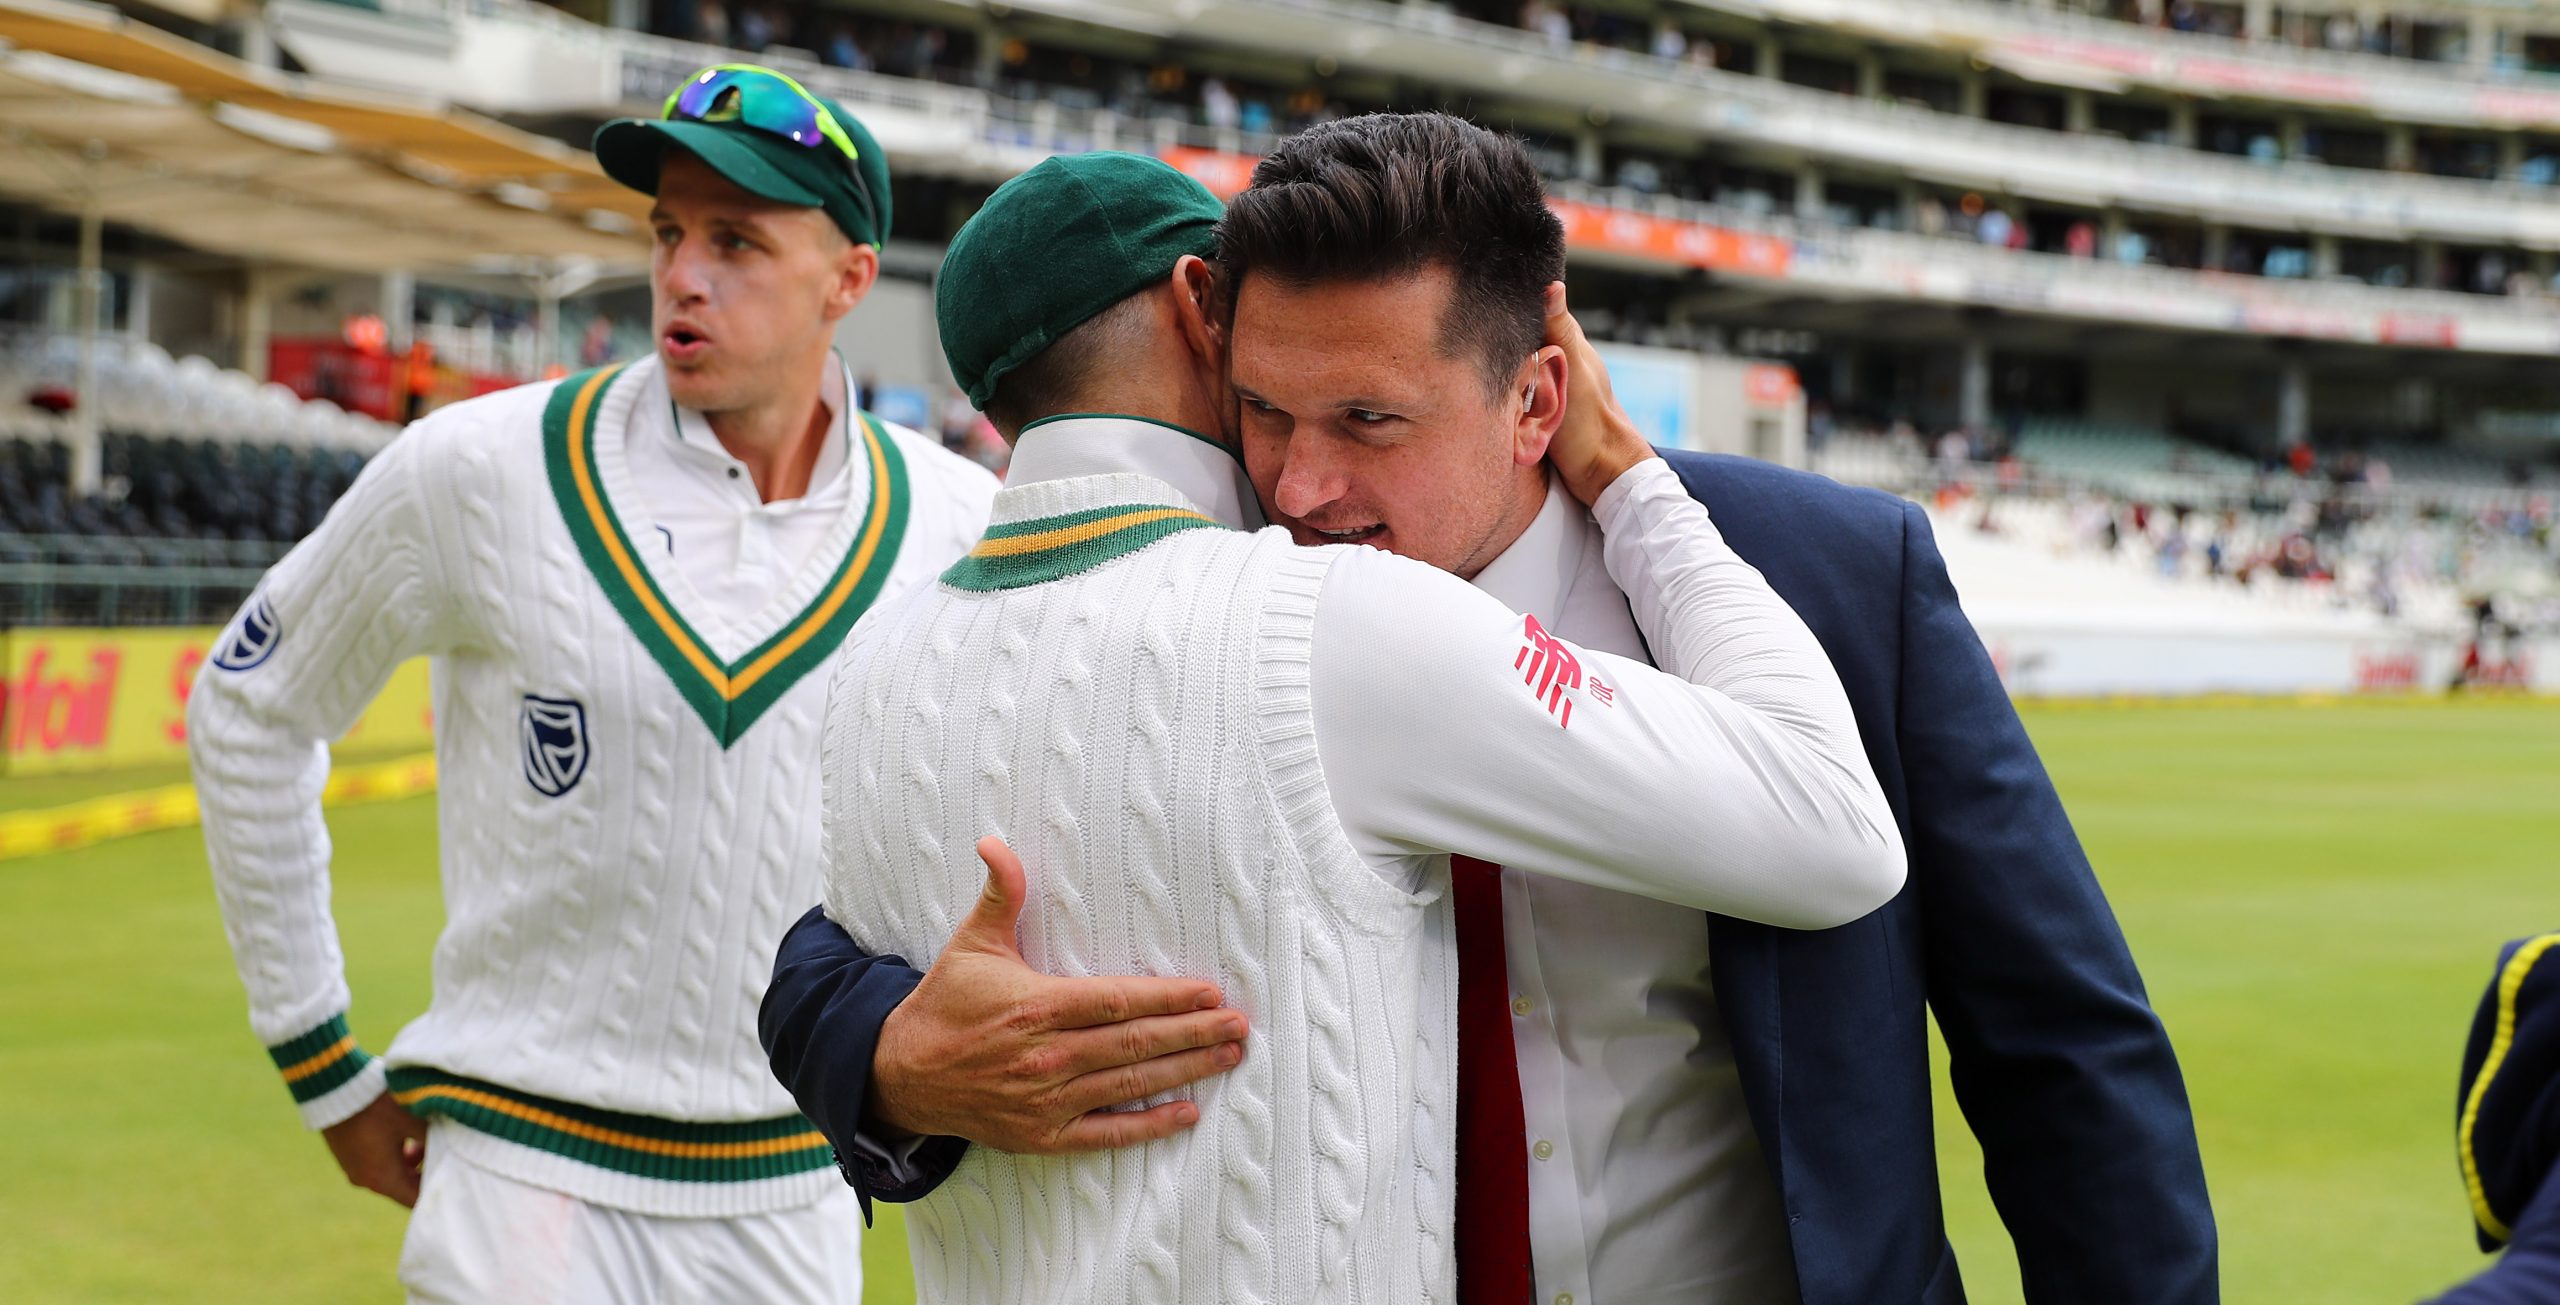 Faf du Plessis’ absence is “tough and disappointing” – Graeme Smith